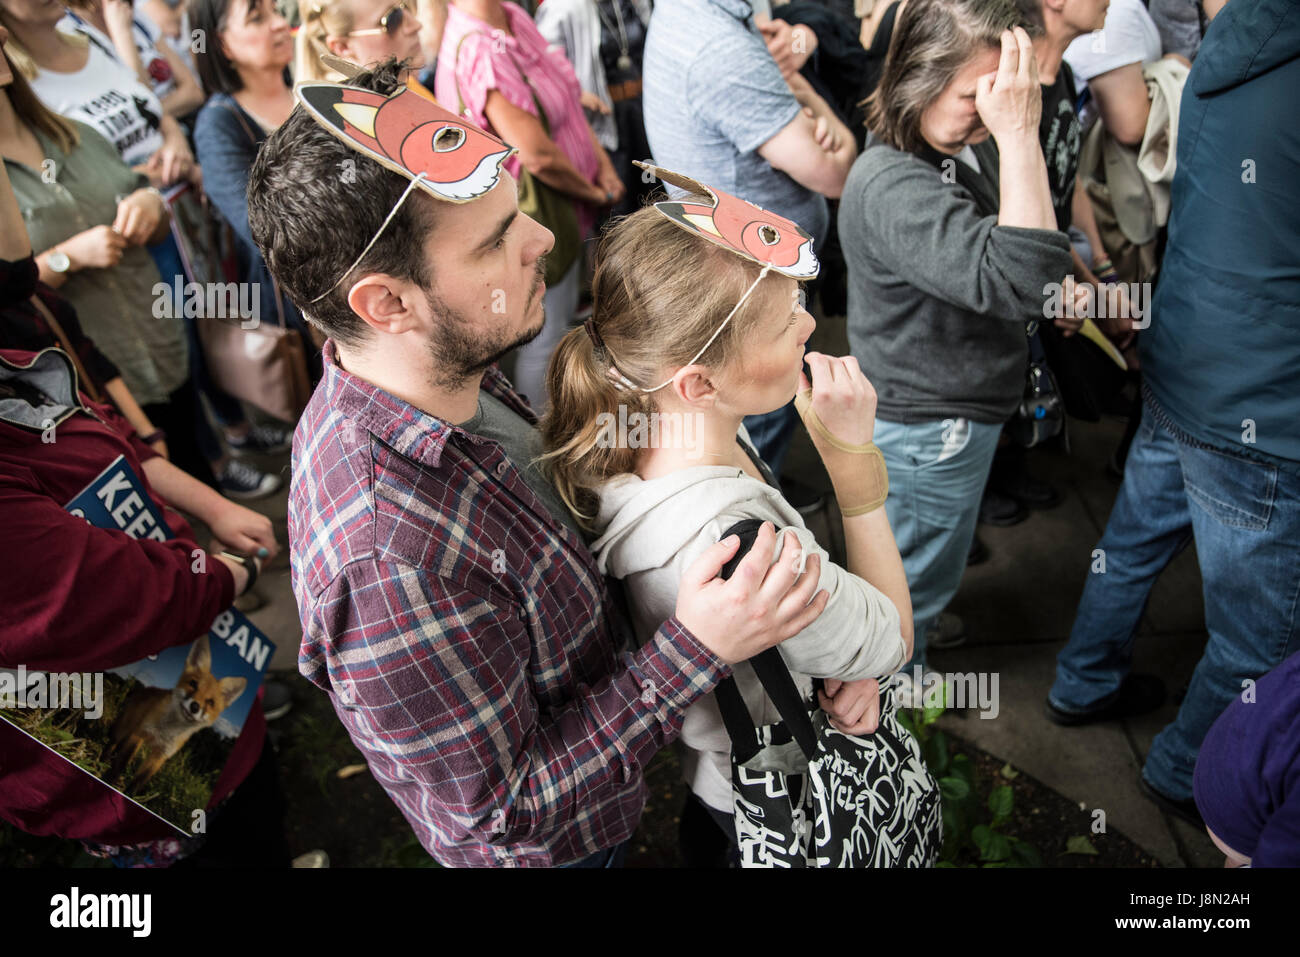 Anti-Fox-Hunting March, 29th May 2017, London - a couple is listening to the speech. Credit: Anja Riedmann/Alamy Live News Stock Photo